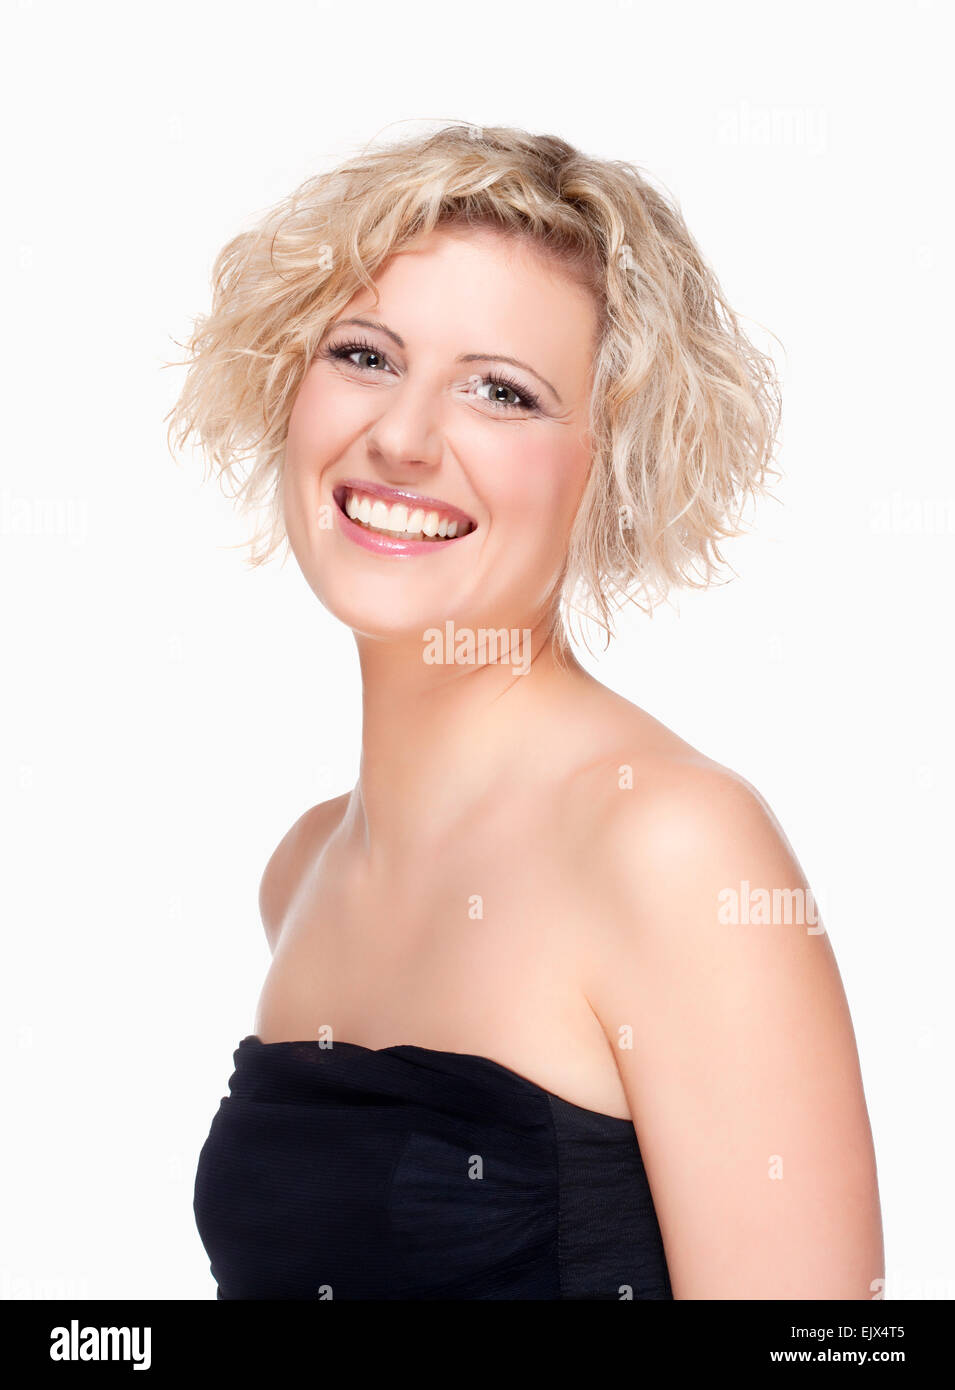 Portrait of a Young Woman with Blond Hair Smiling Stock Photo